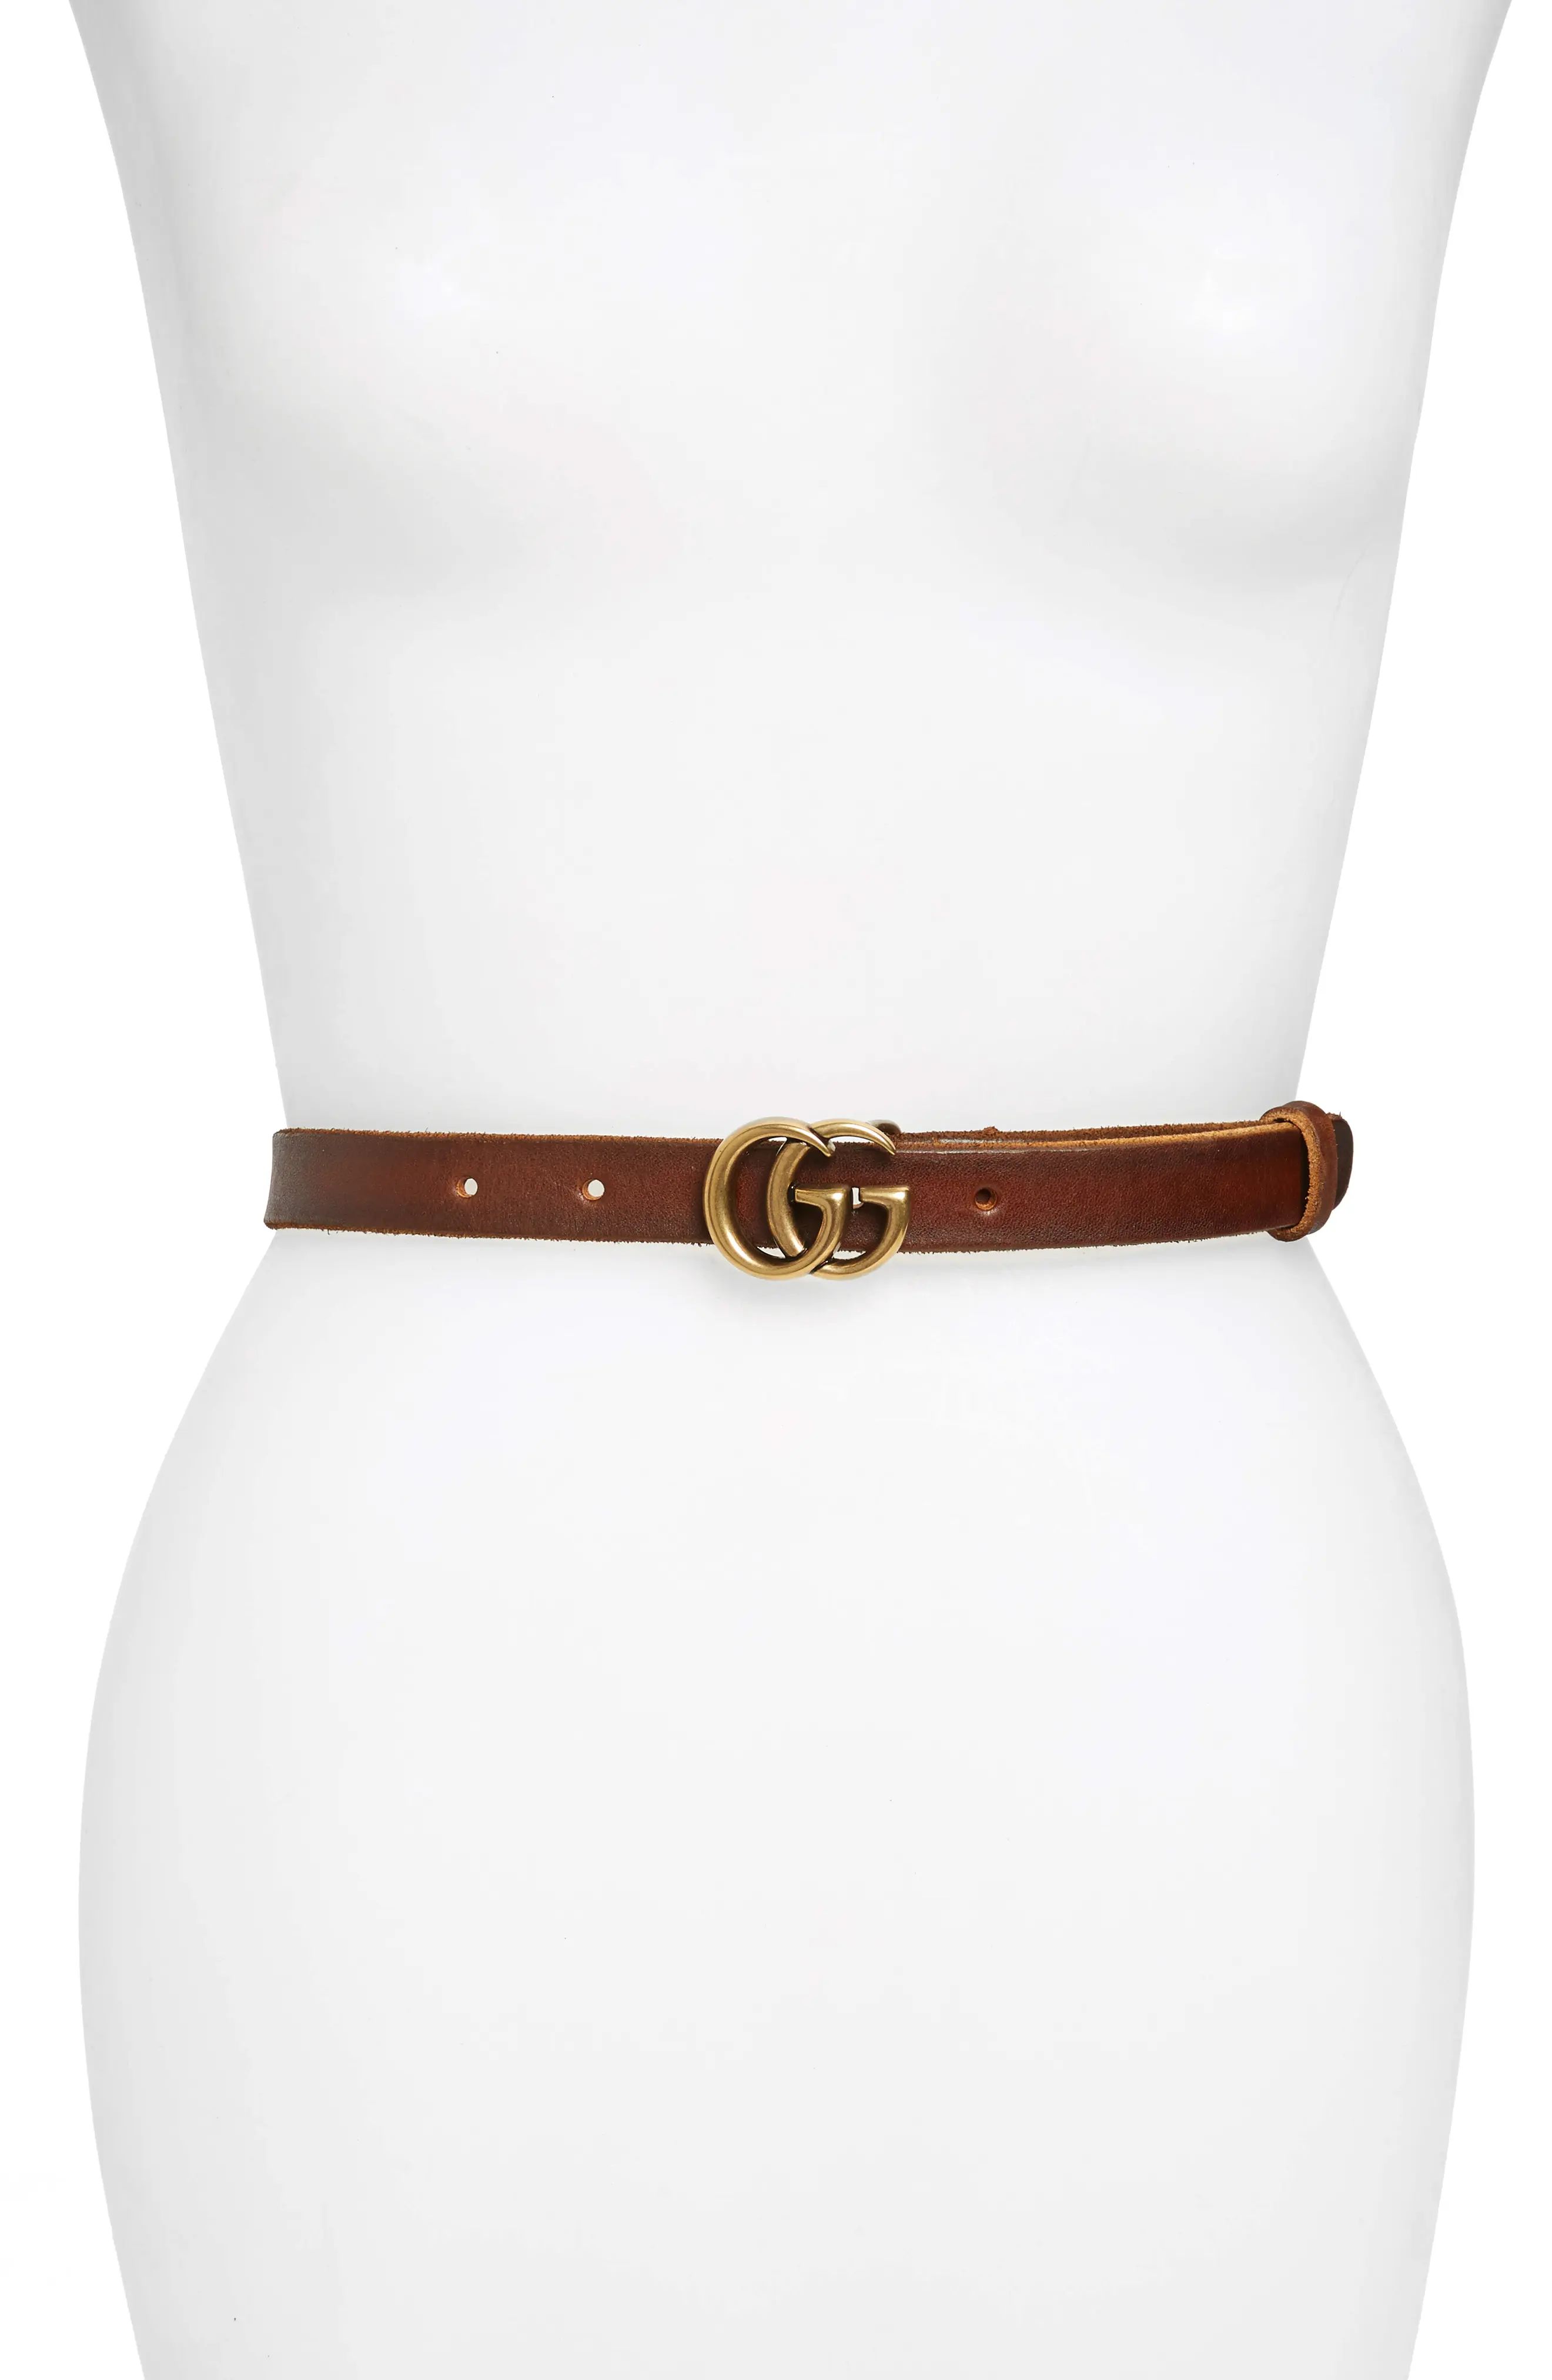 Women's Gucci Leather Belt, Size 90 - Cuir | Nordstrom